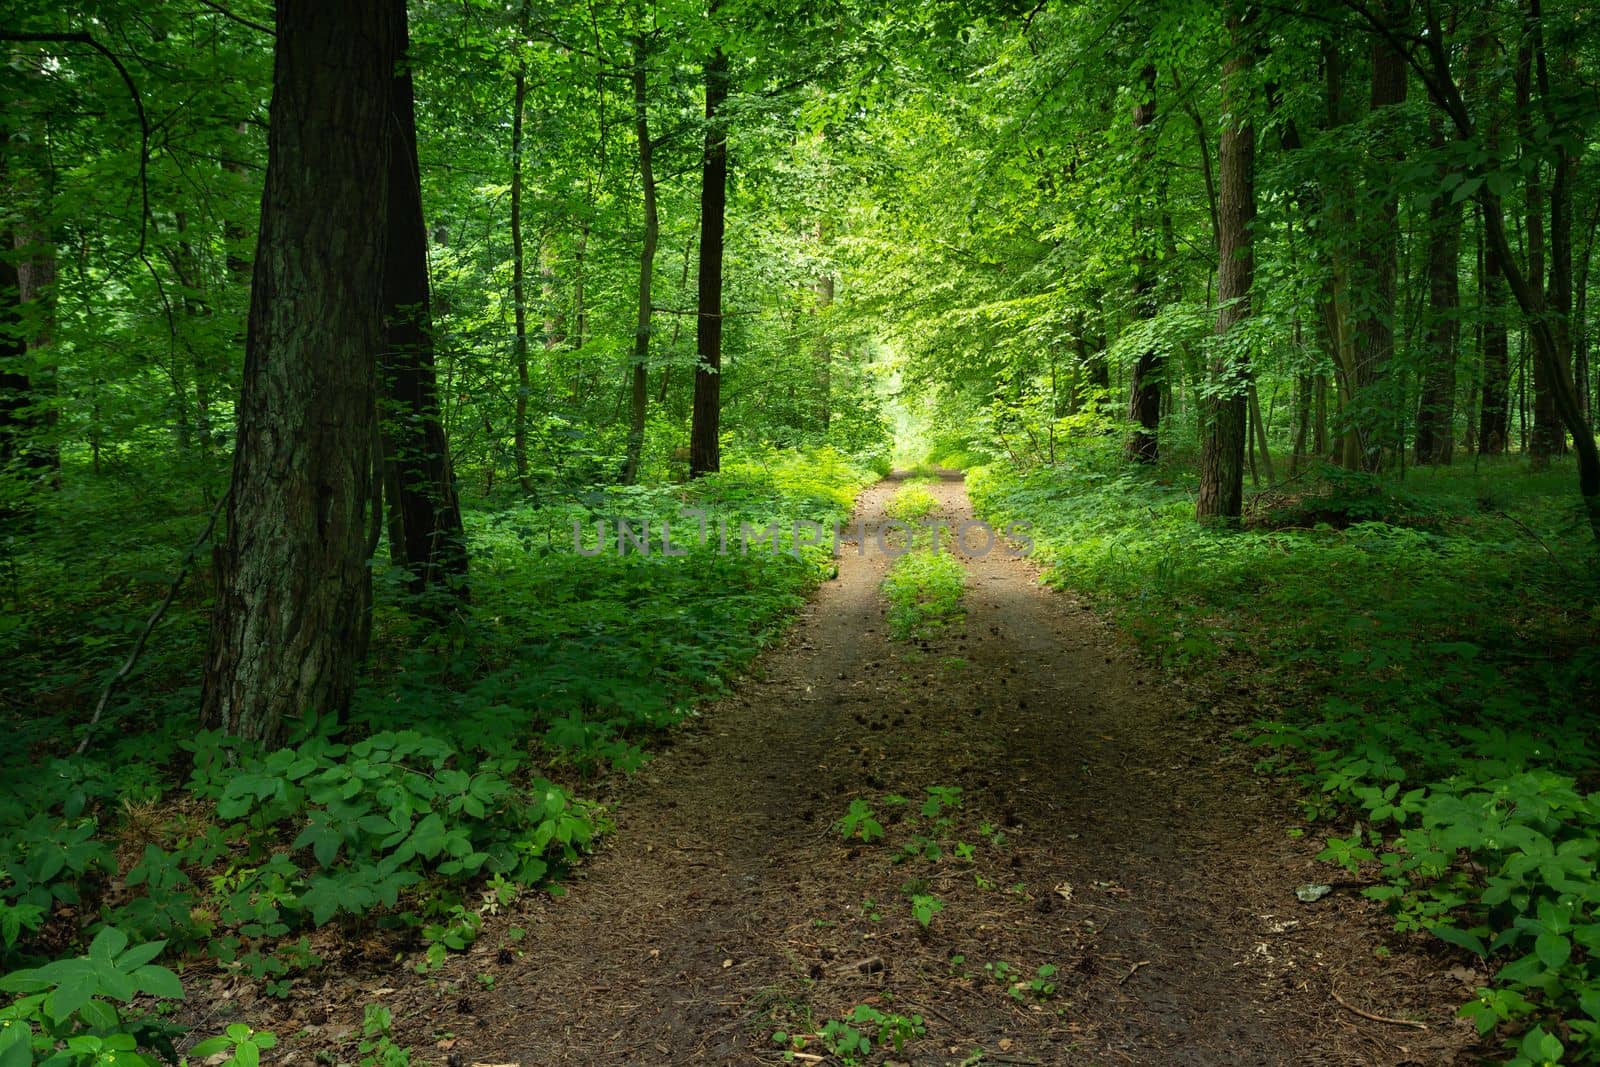 A dirt road through a dense and green forest in Poland by darekb22